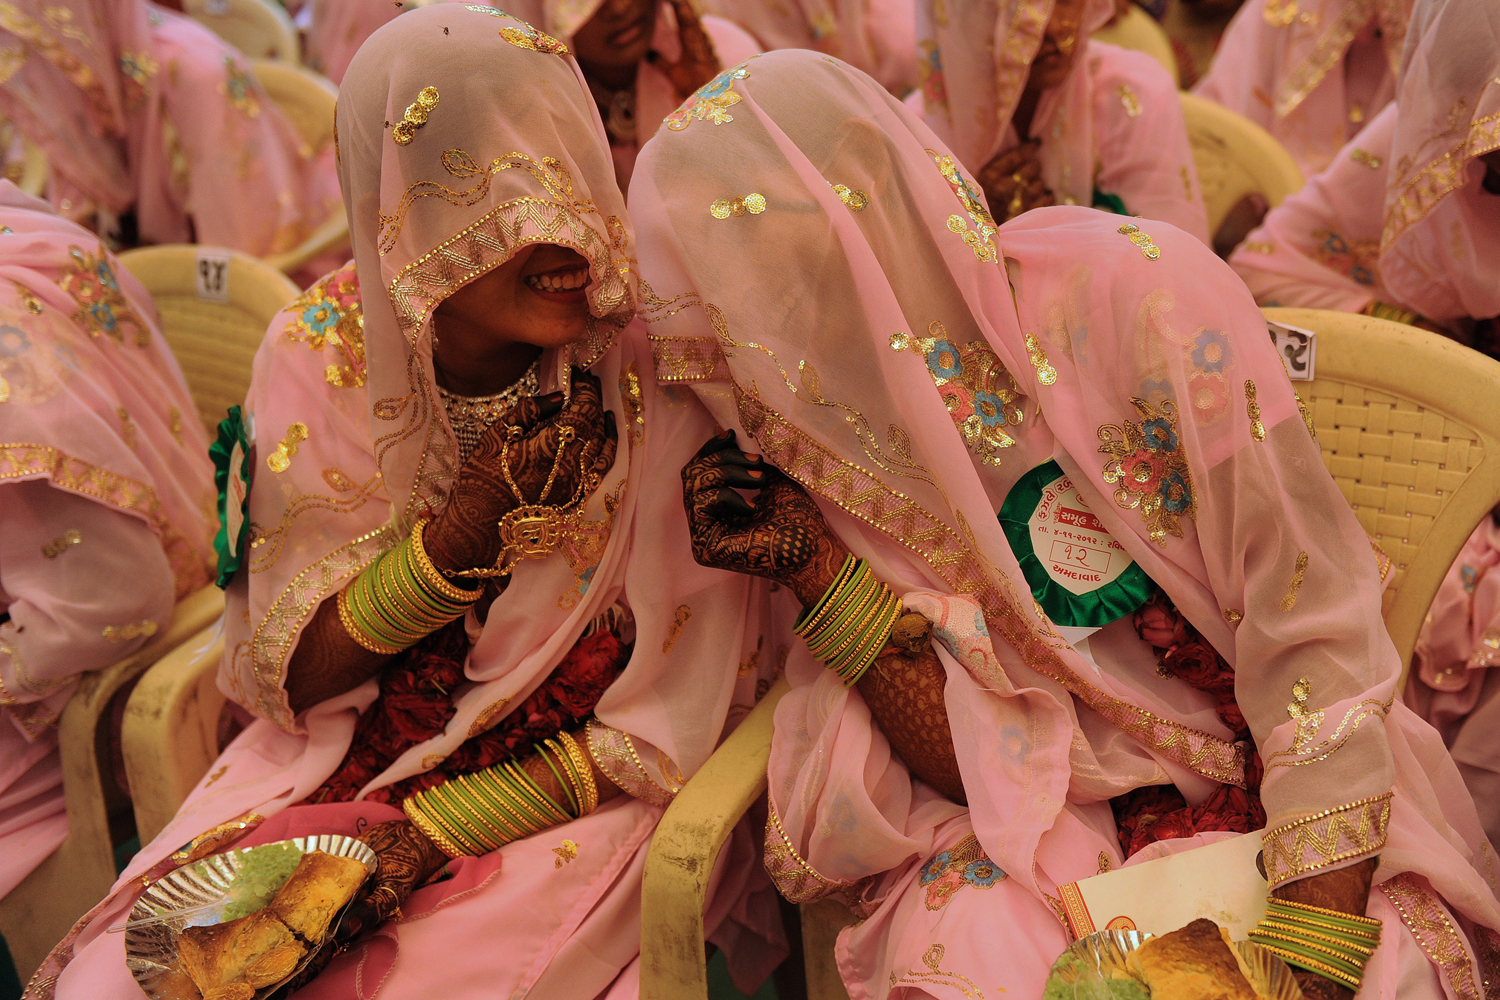 Image: Nov. 4, 2012. Indian Muslim brides chat as they wait for the start of a mass wedding ceremony in Ahmedabad.